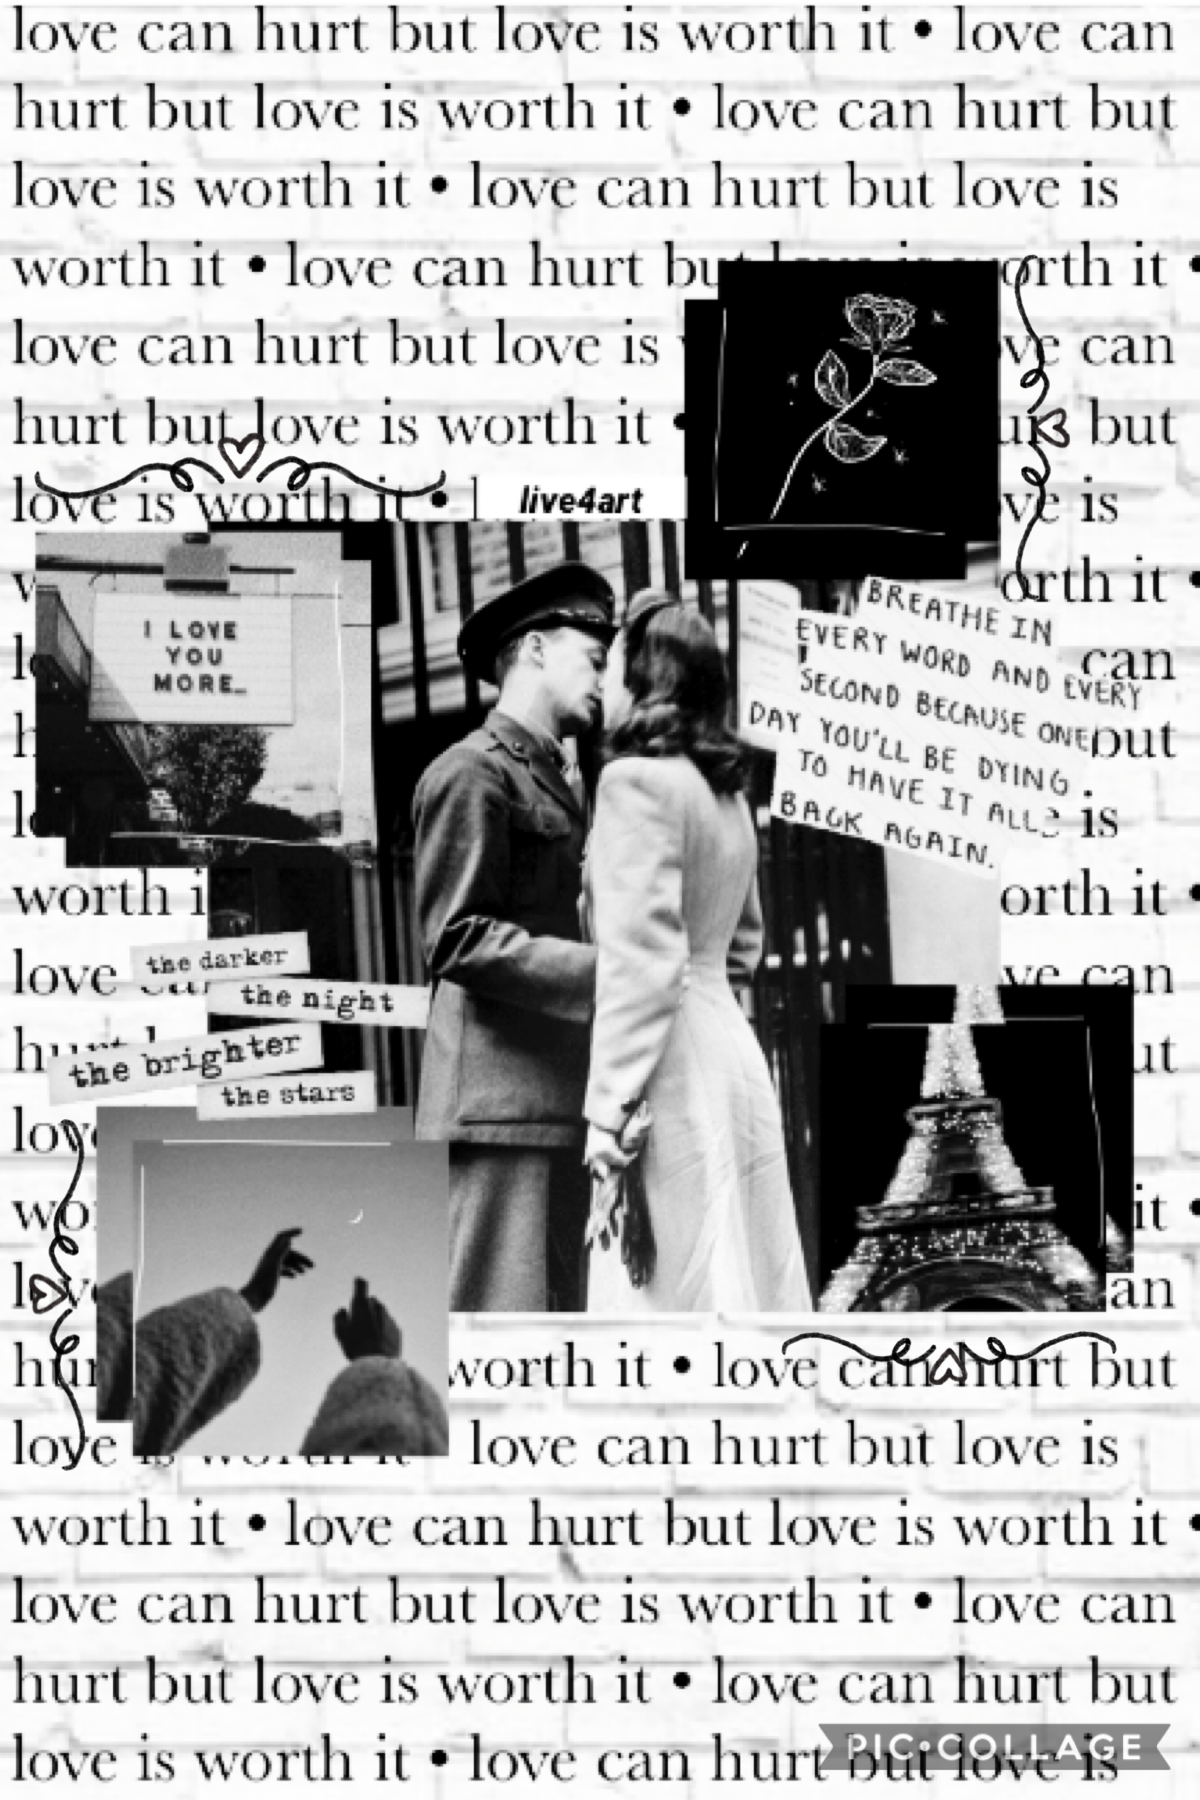 ~tap~
inspired by -phosphenes- (who was inspired by someone else but since i can't click the post i can't see who! comment if you know who she was inspired by if you know please!)
"love can hurt but love is worth it"